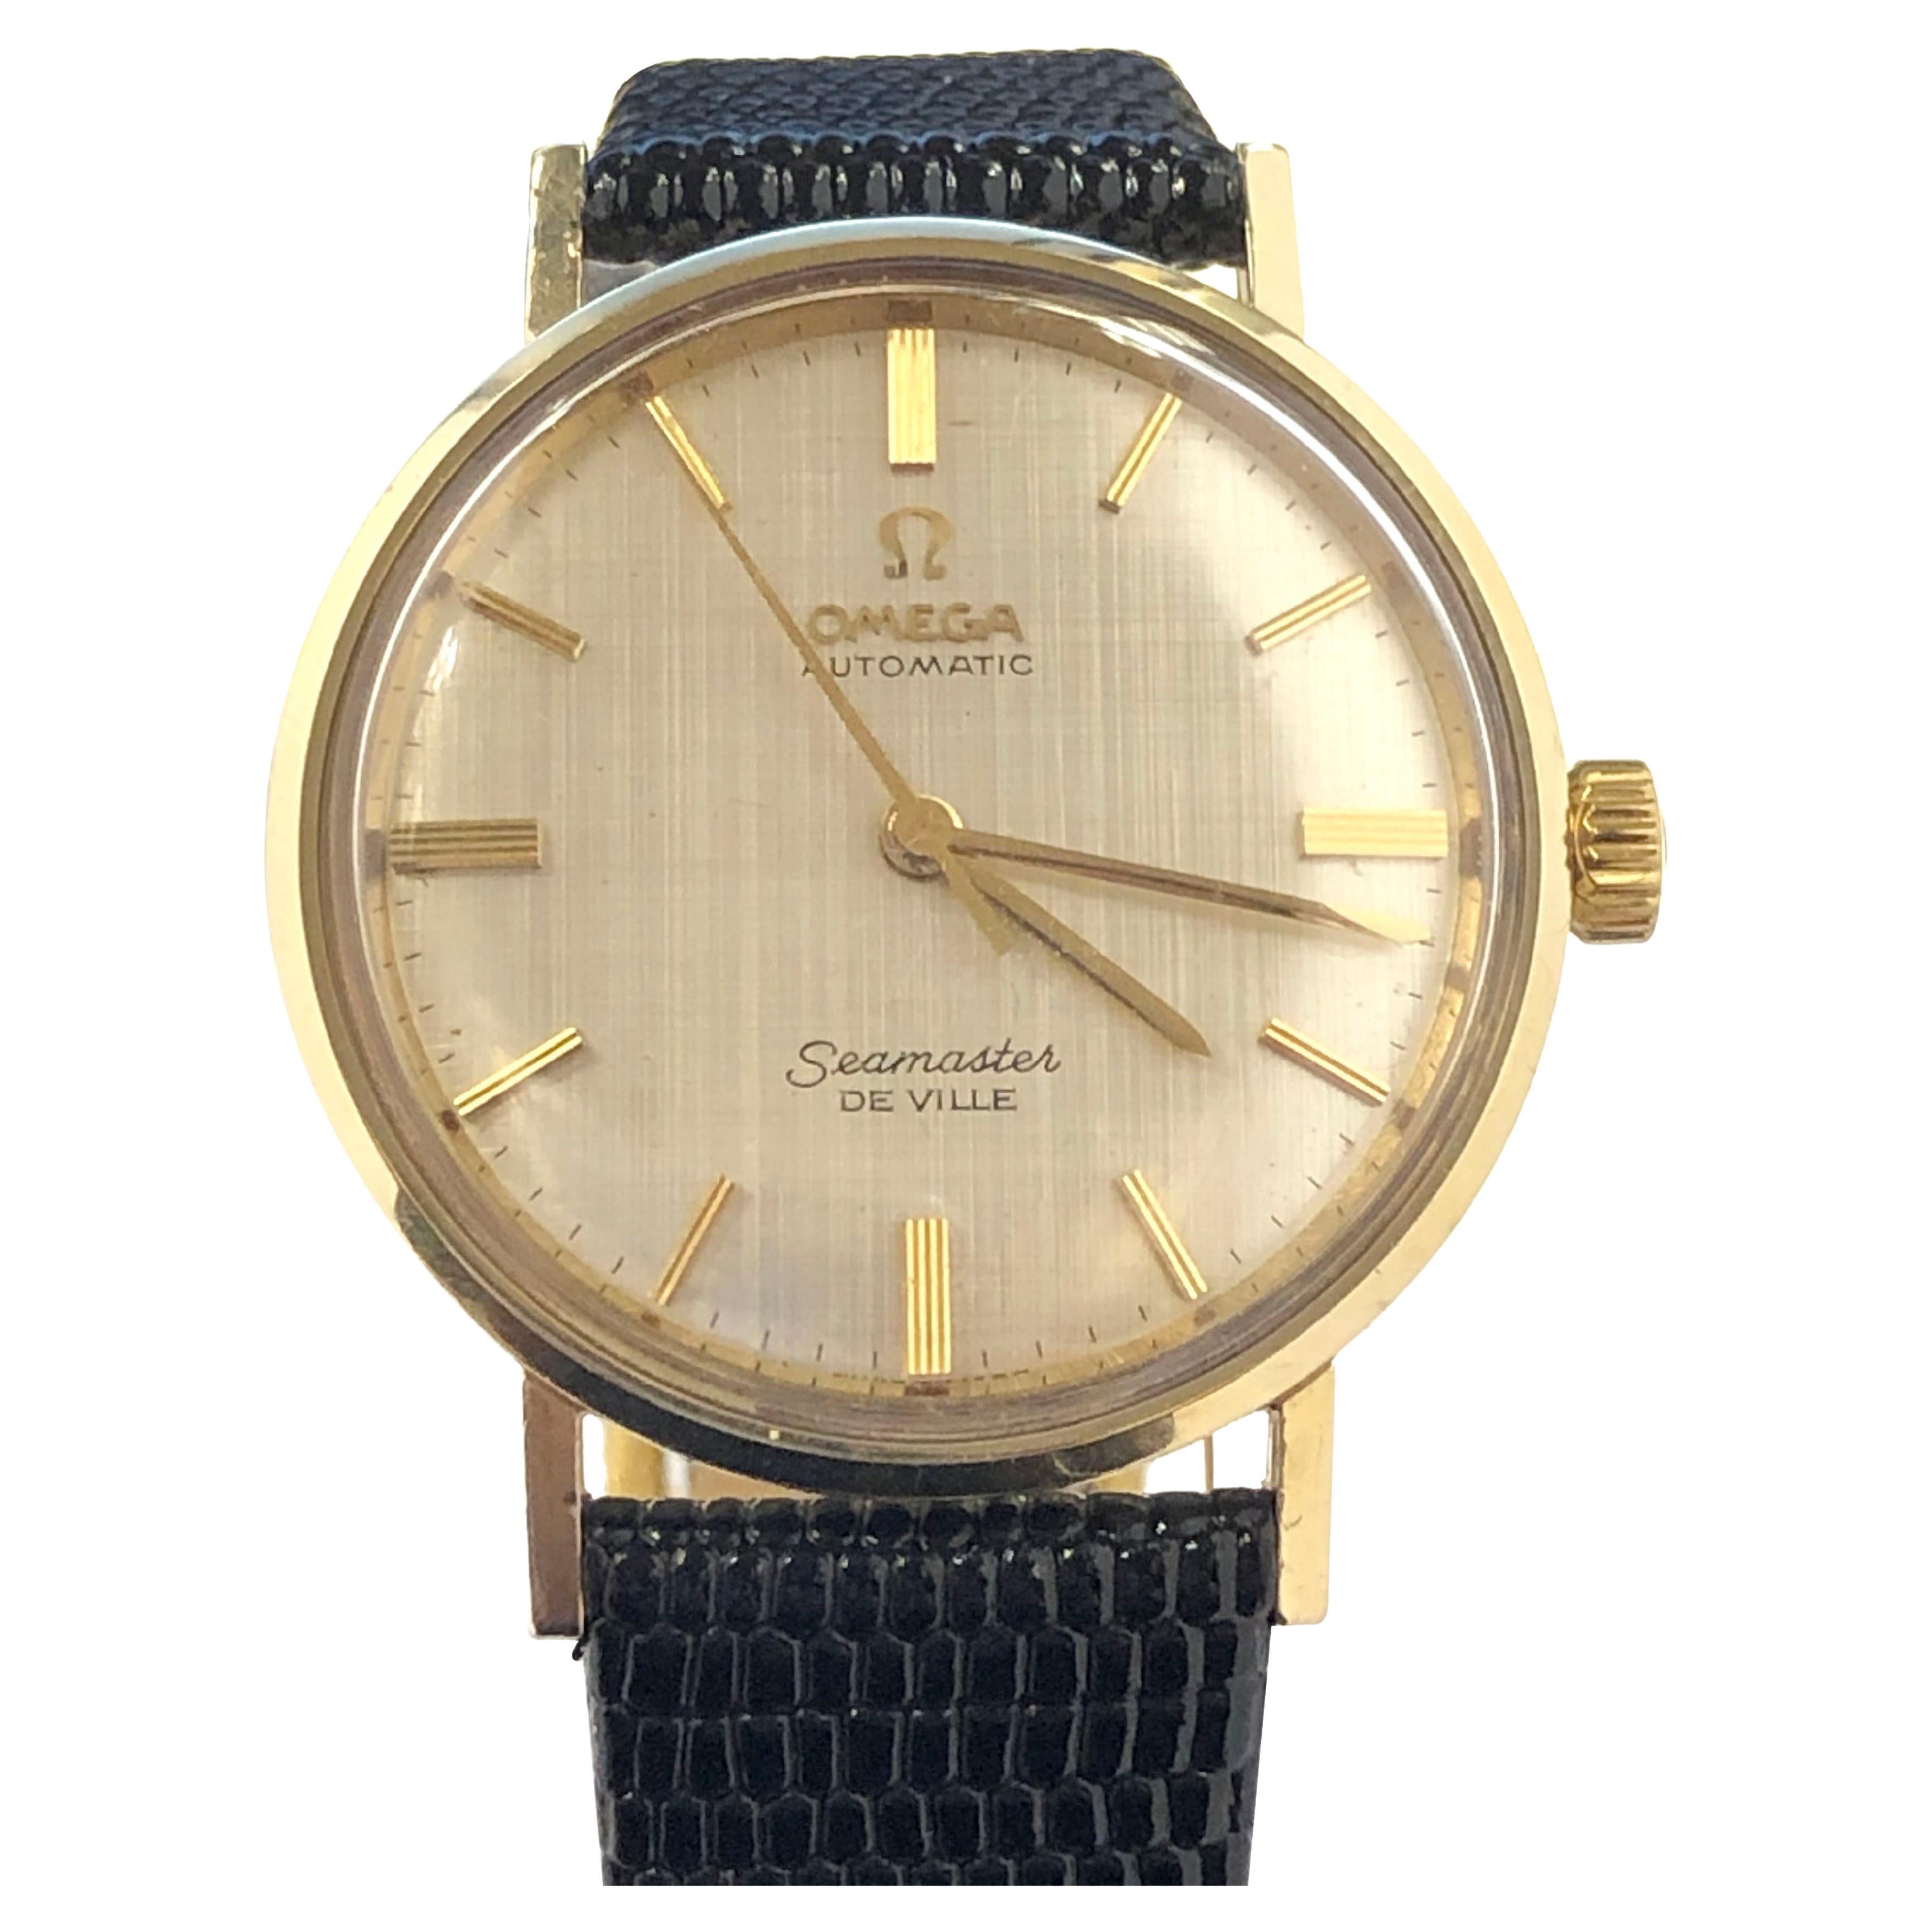 Circa late 1960s Omega Seamaster De Ville Wrist Watch, 34 M.M. 14k Yellow Gold 2 Piece Water resistant case with Seamaster Emblem on the case back. Caliber 550 24 Jewel , Automatic self winding movement. Beautiful mint condition Gold Linen dial with